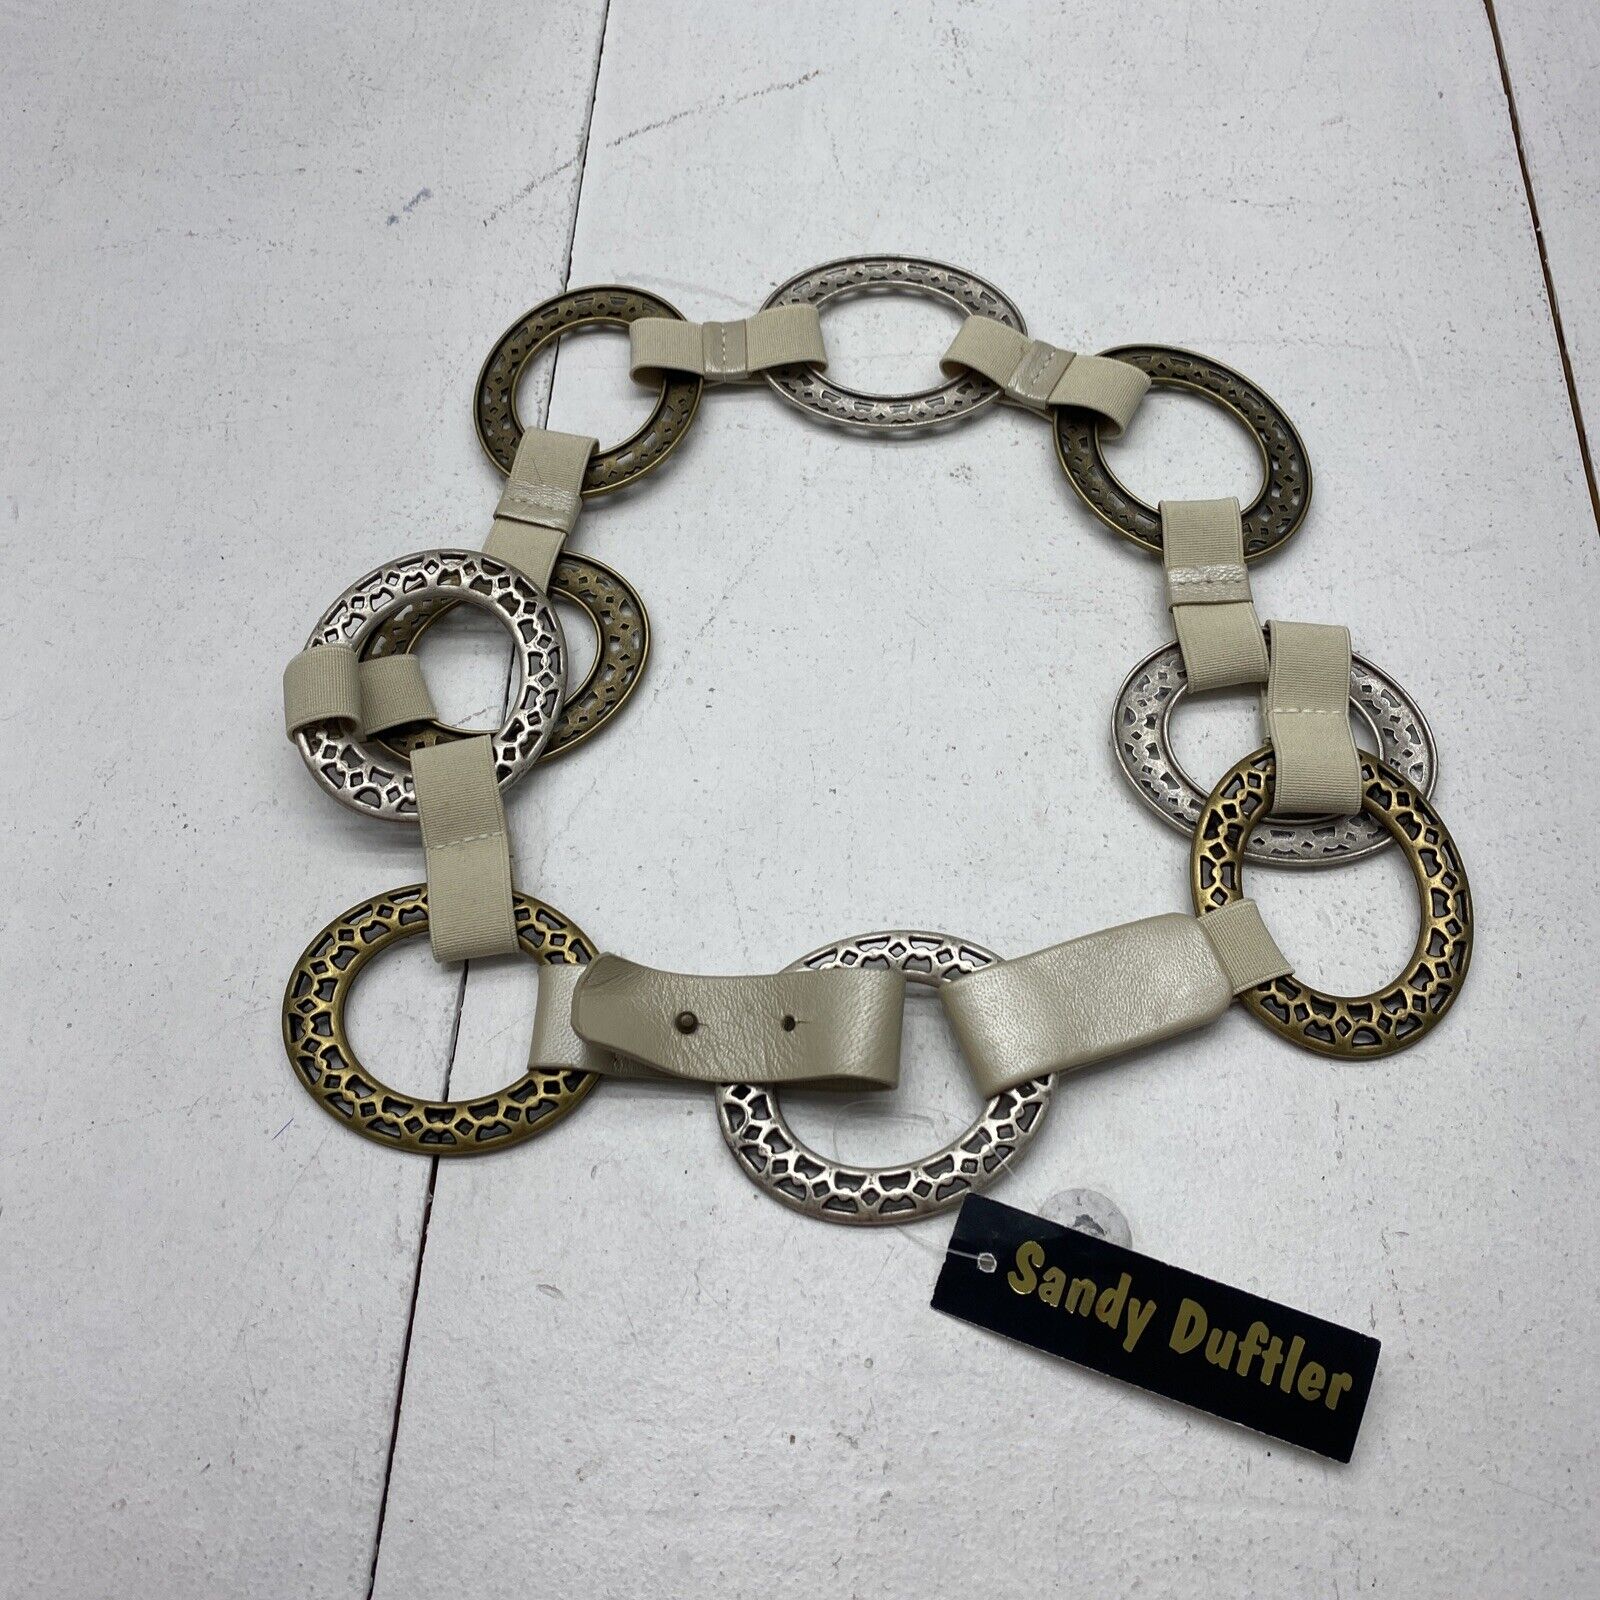 Sandy Duftler 6474 Gold/Silver Tone Chain Cream Leather Elastic Belt Size Large